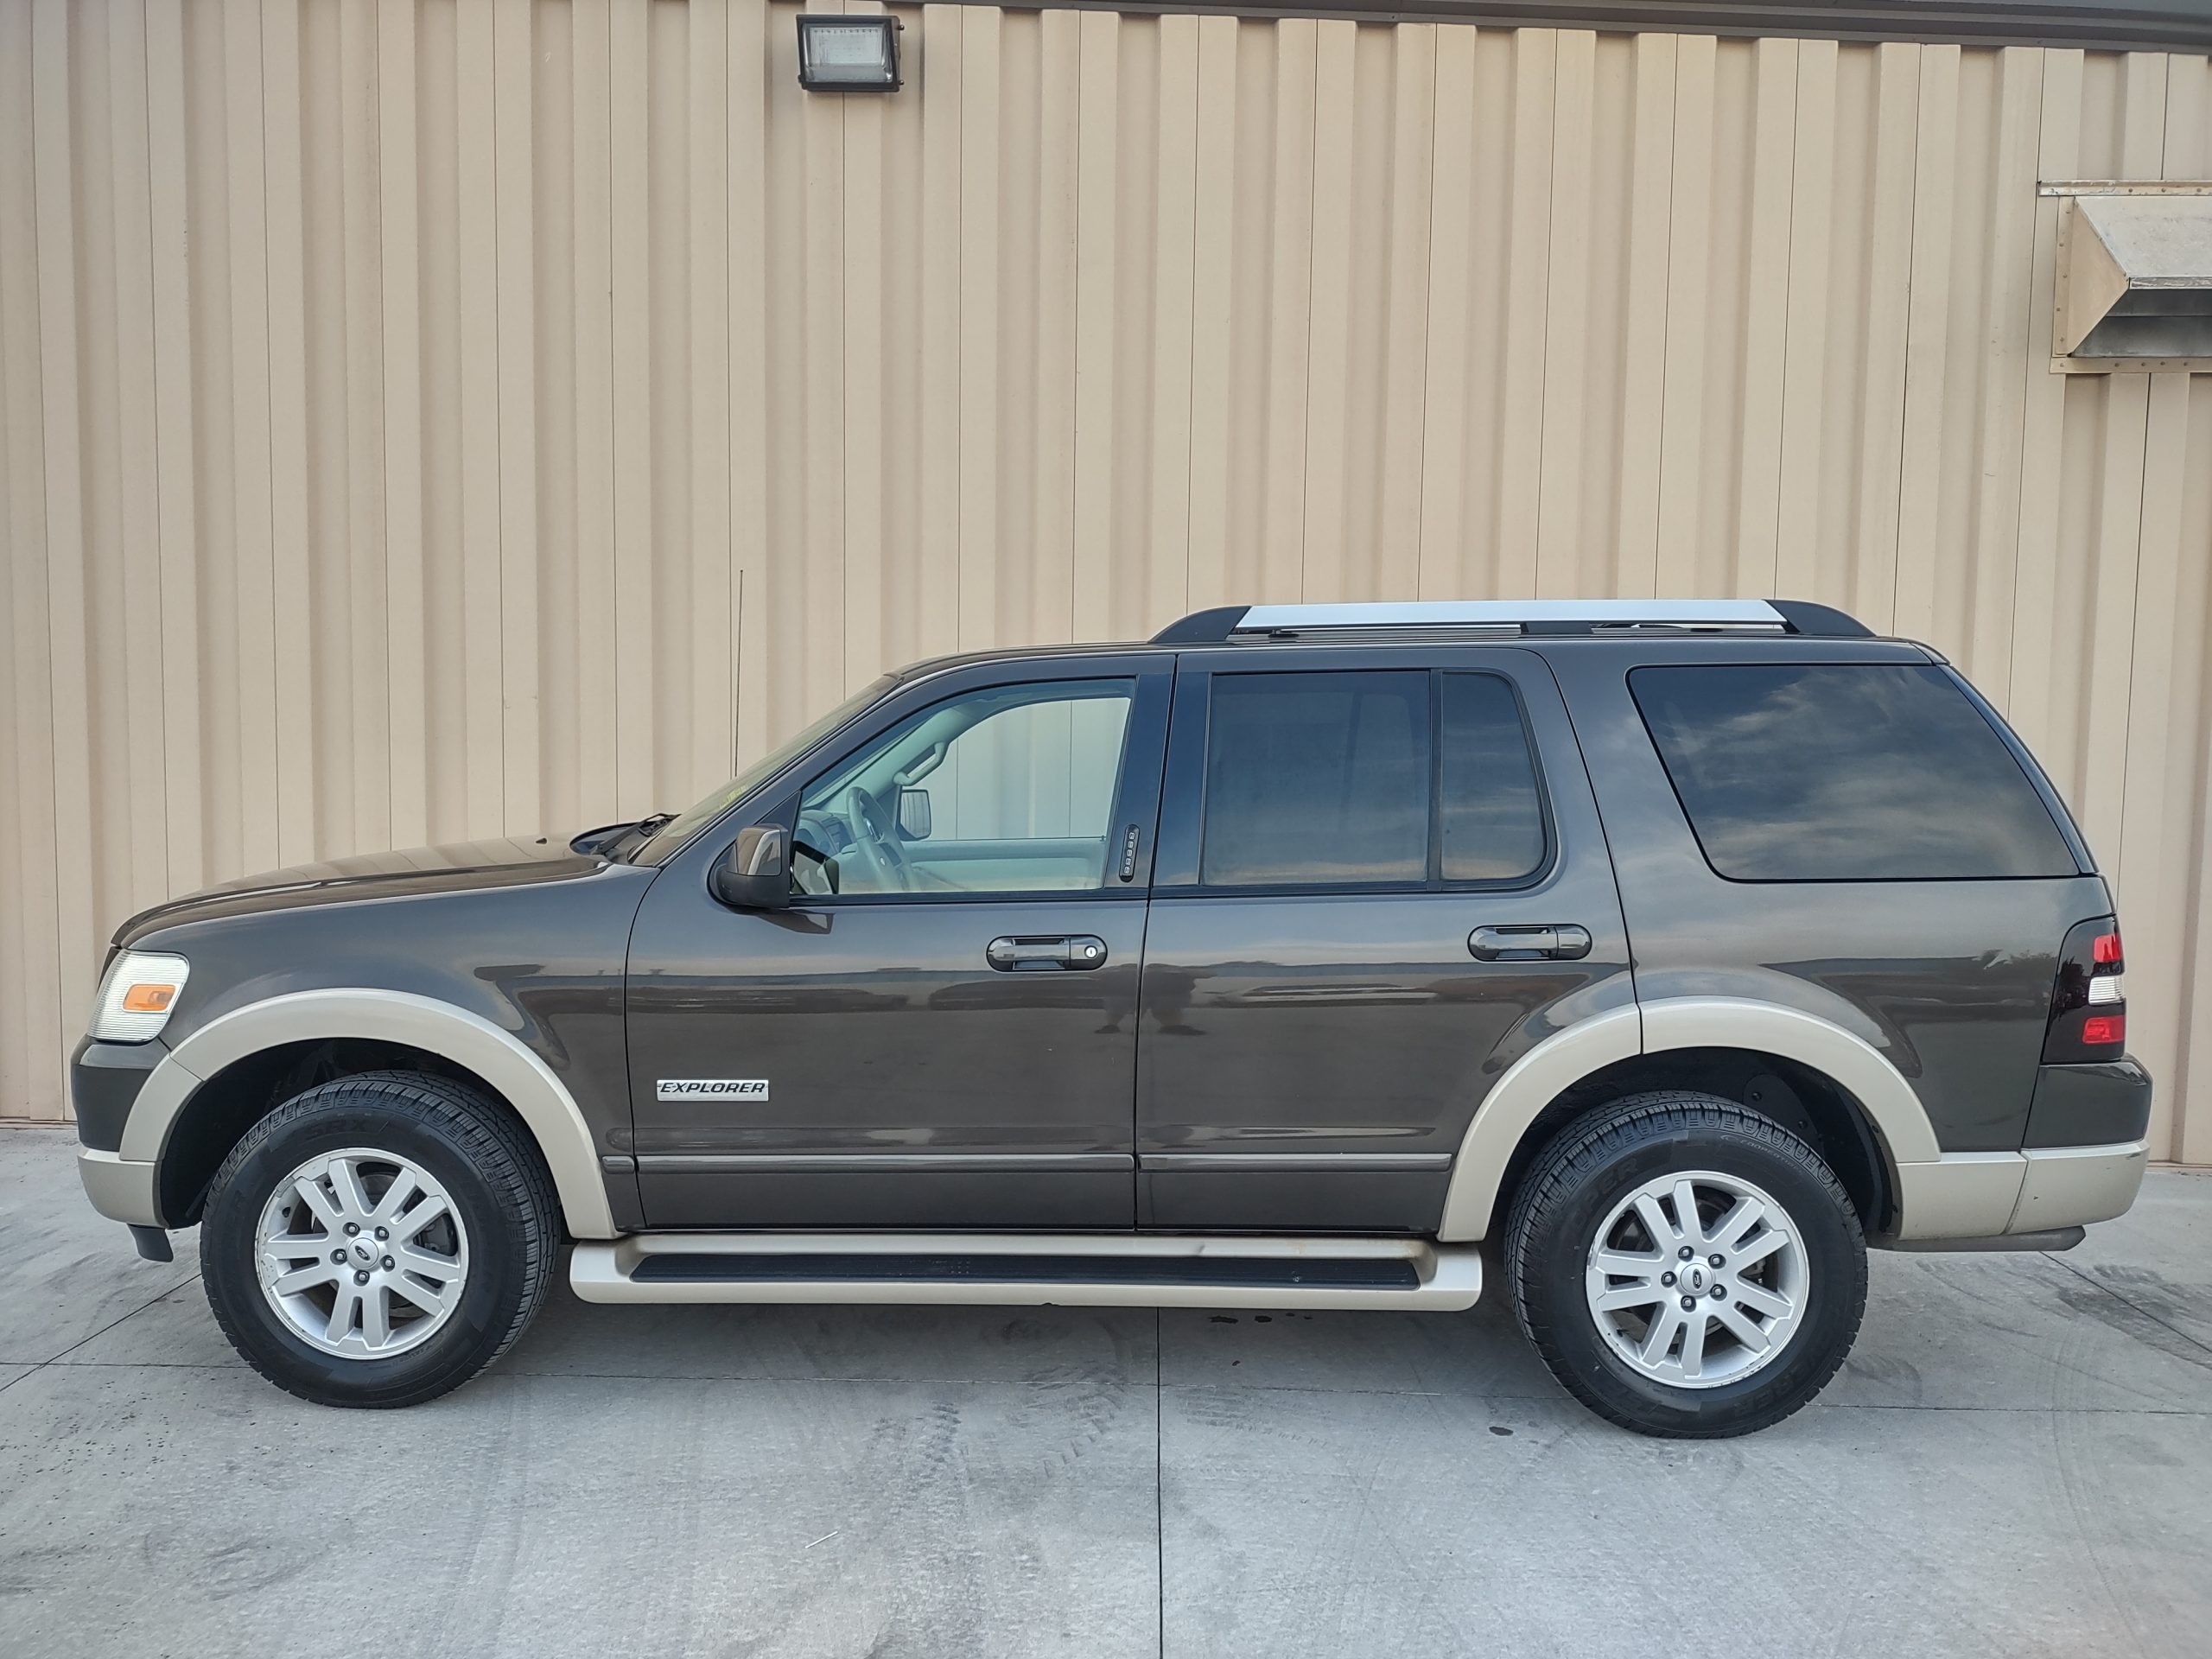 Used 2007 Ford Explorer Eddie Bauer SUV for sale in 